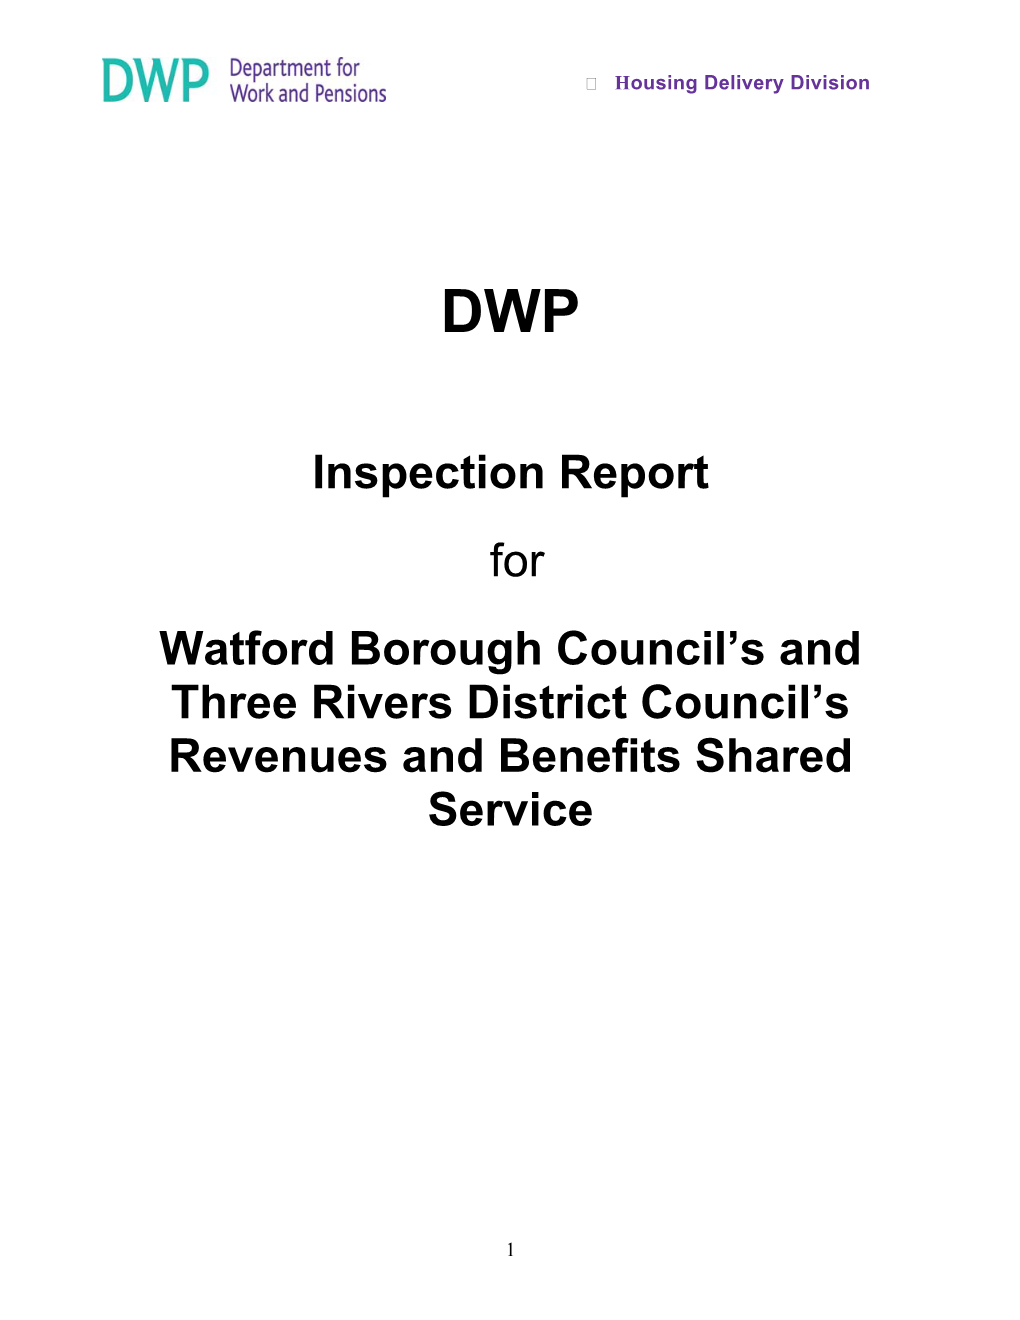 Inspection Report for Watford Borough Council's and Three Rivers District